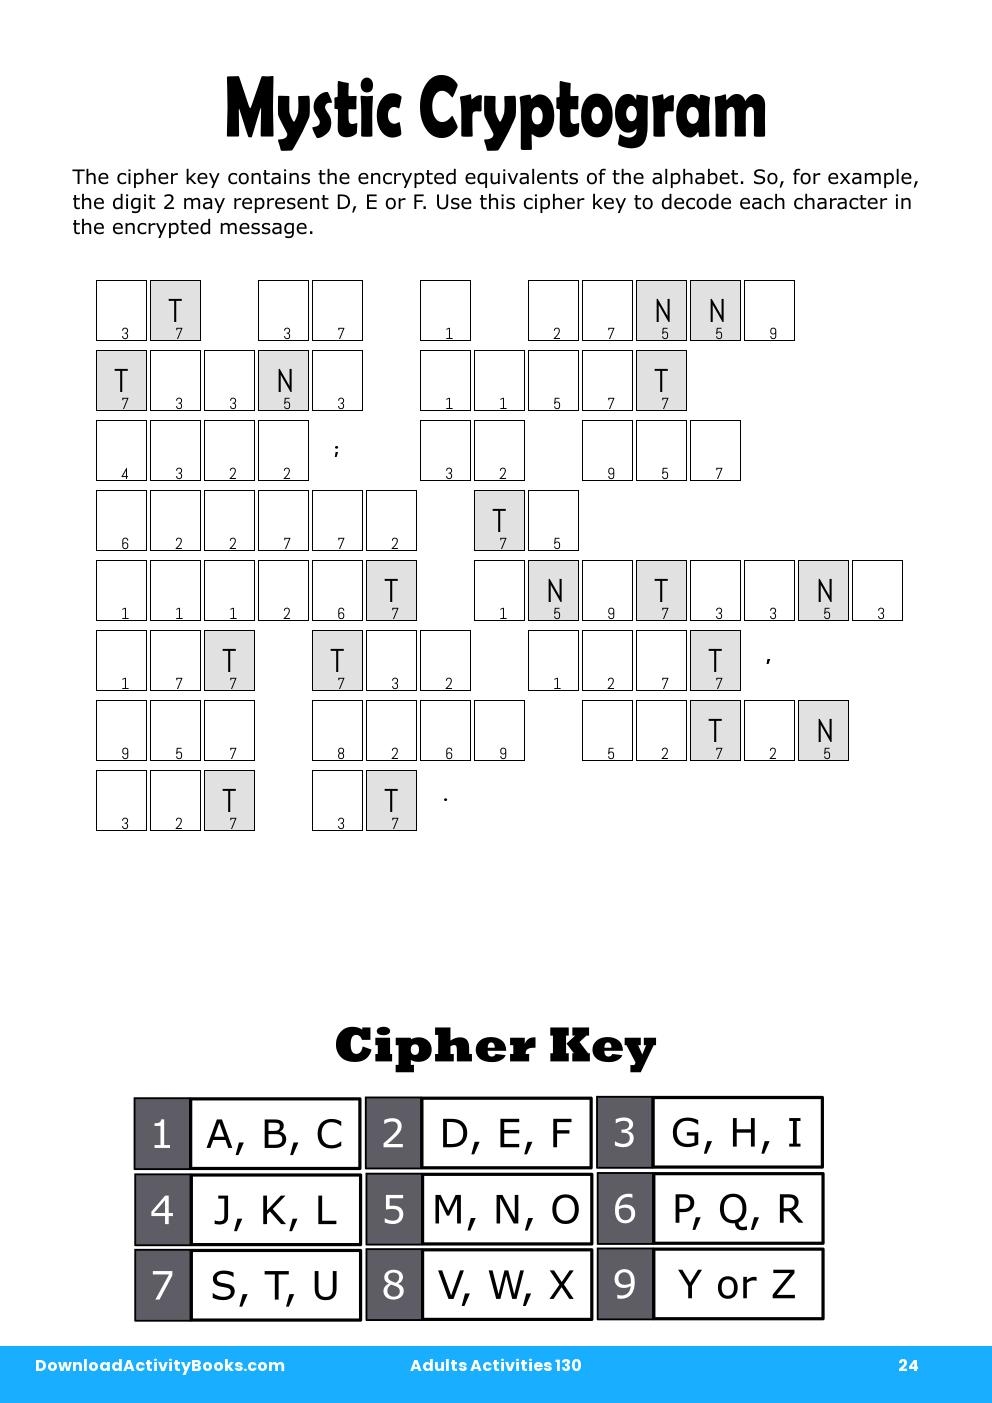 Mystic Cryptogram in Adults Activities 130